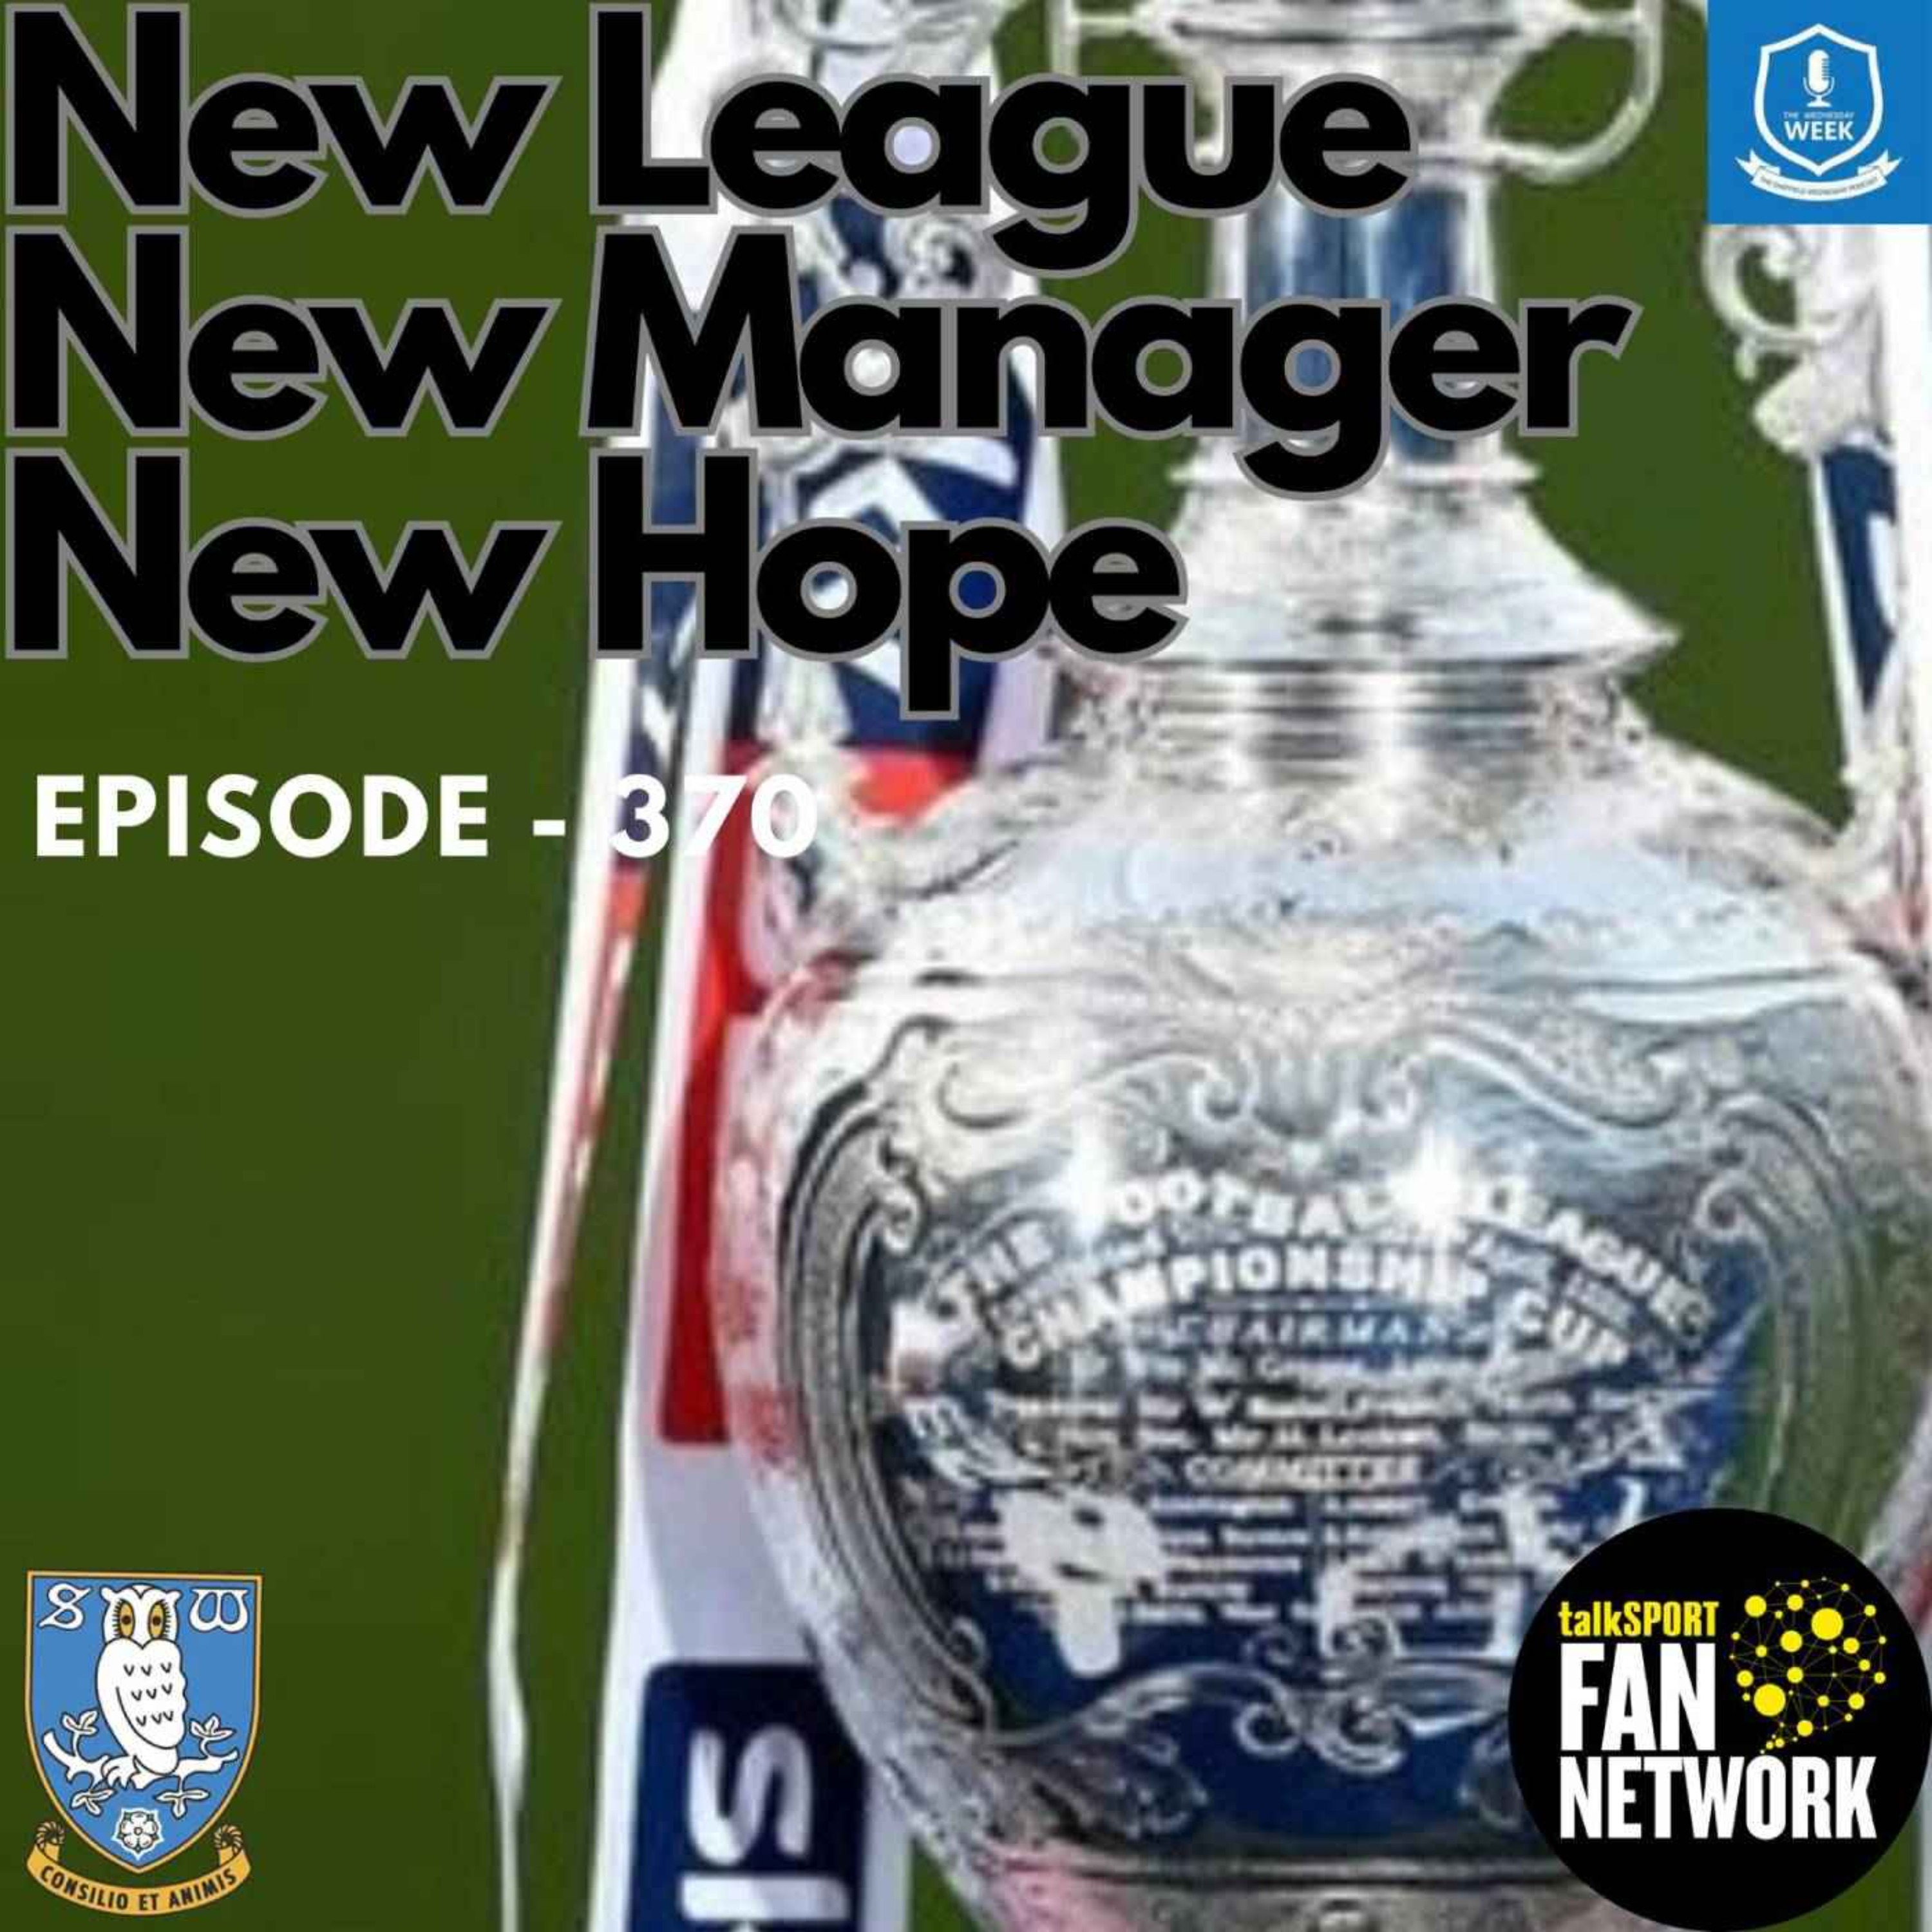 New league, New manager, New Hope